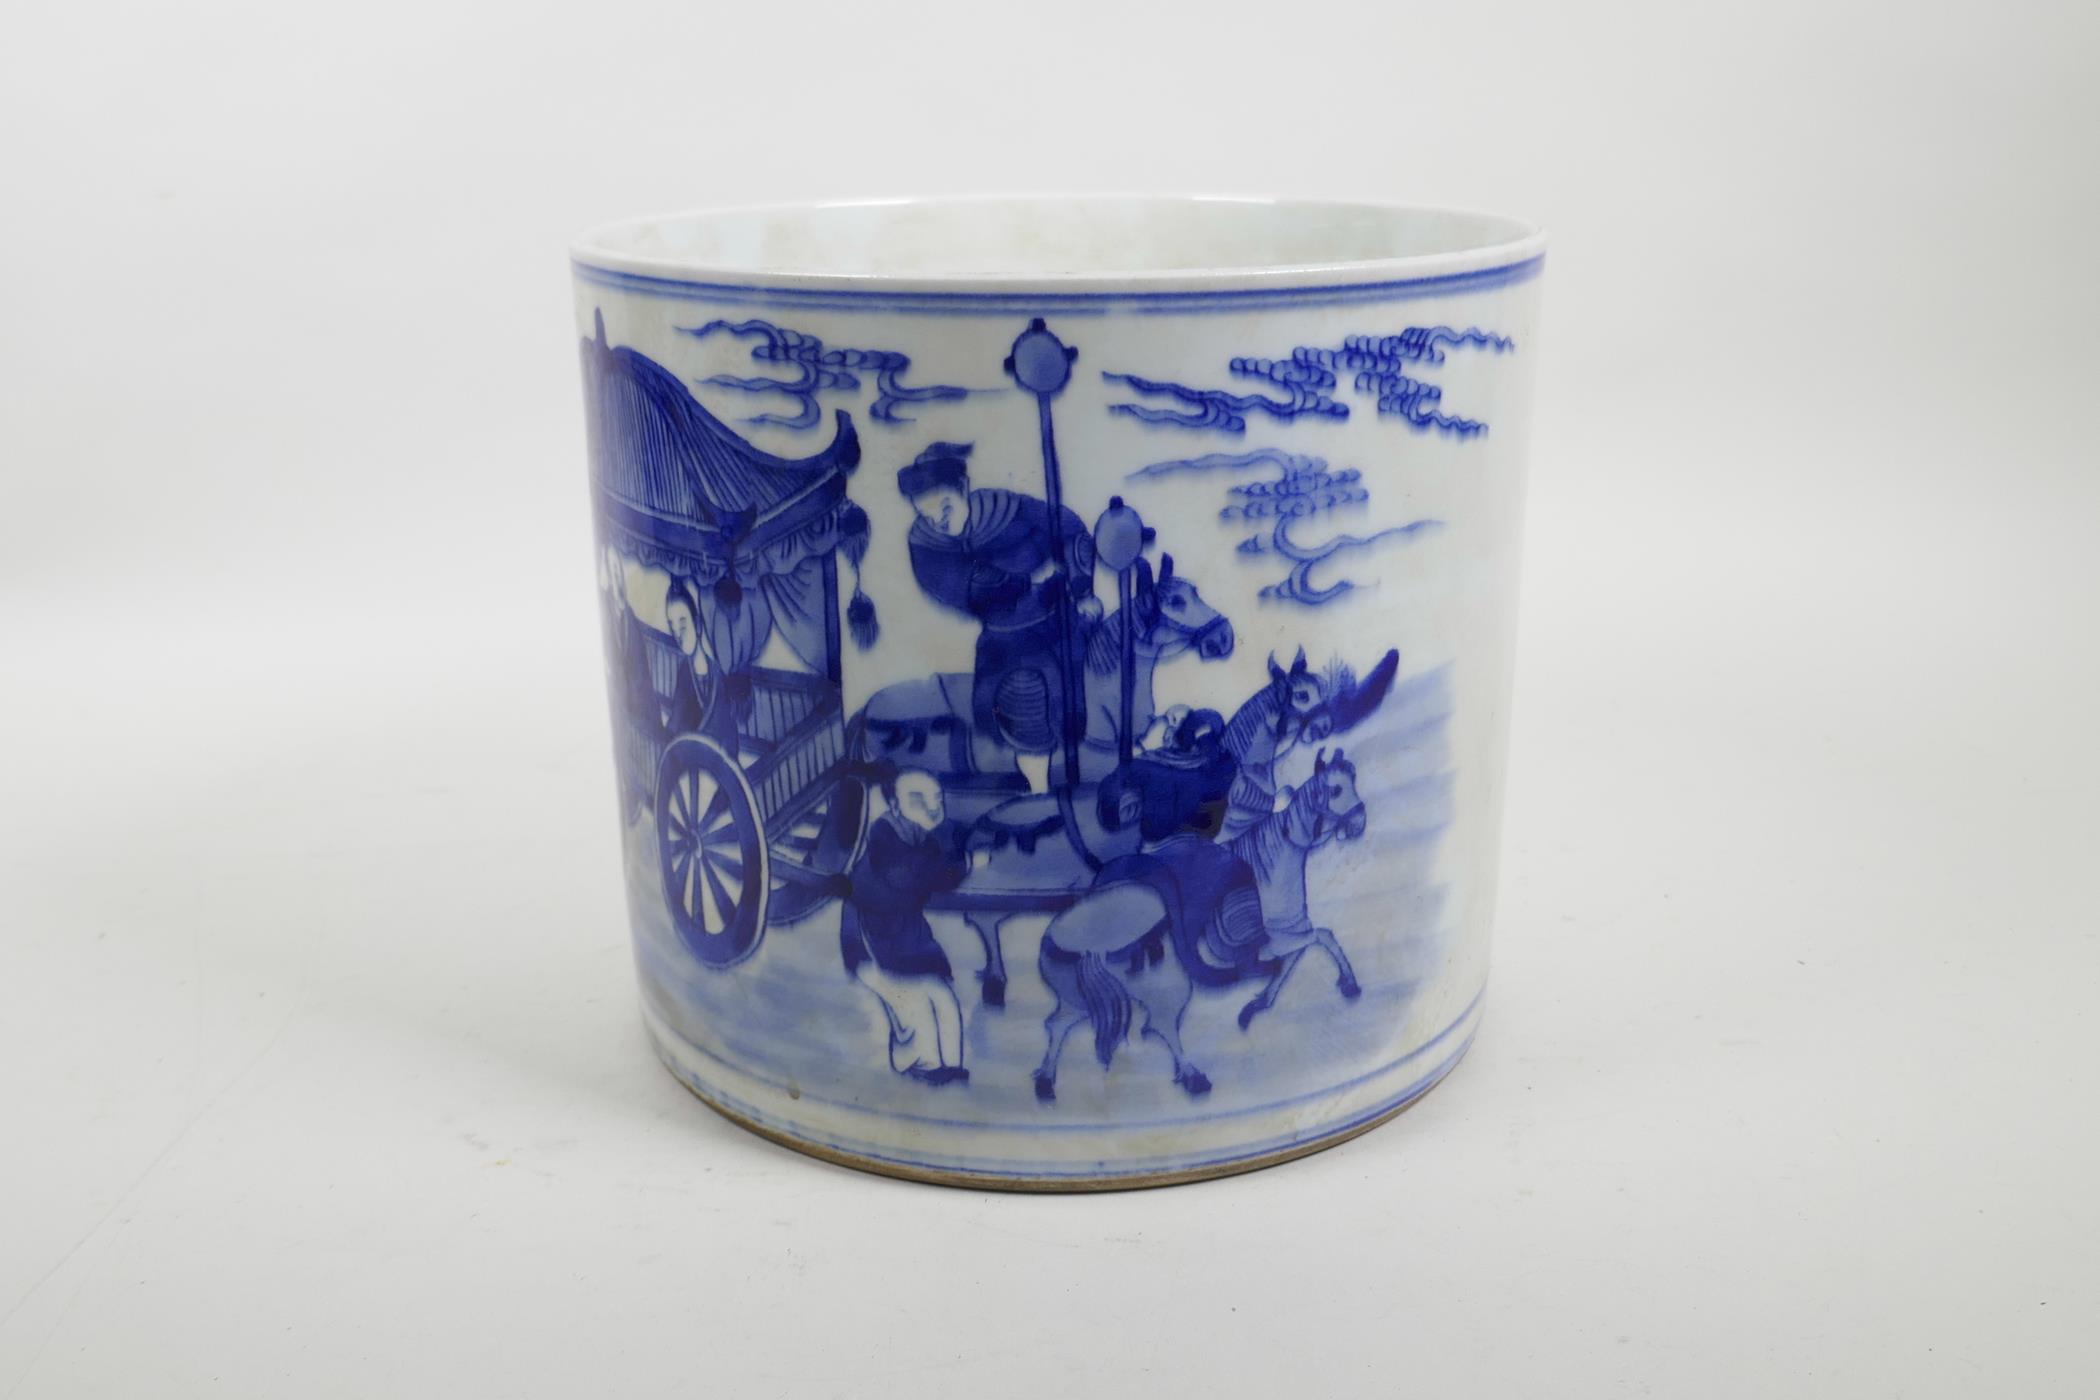 A Chinese blue and white porcelain brush pot decorated with a procession of carts and figures riding - Image 3 of 4